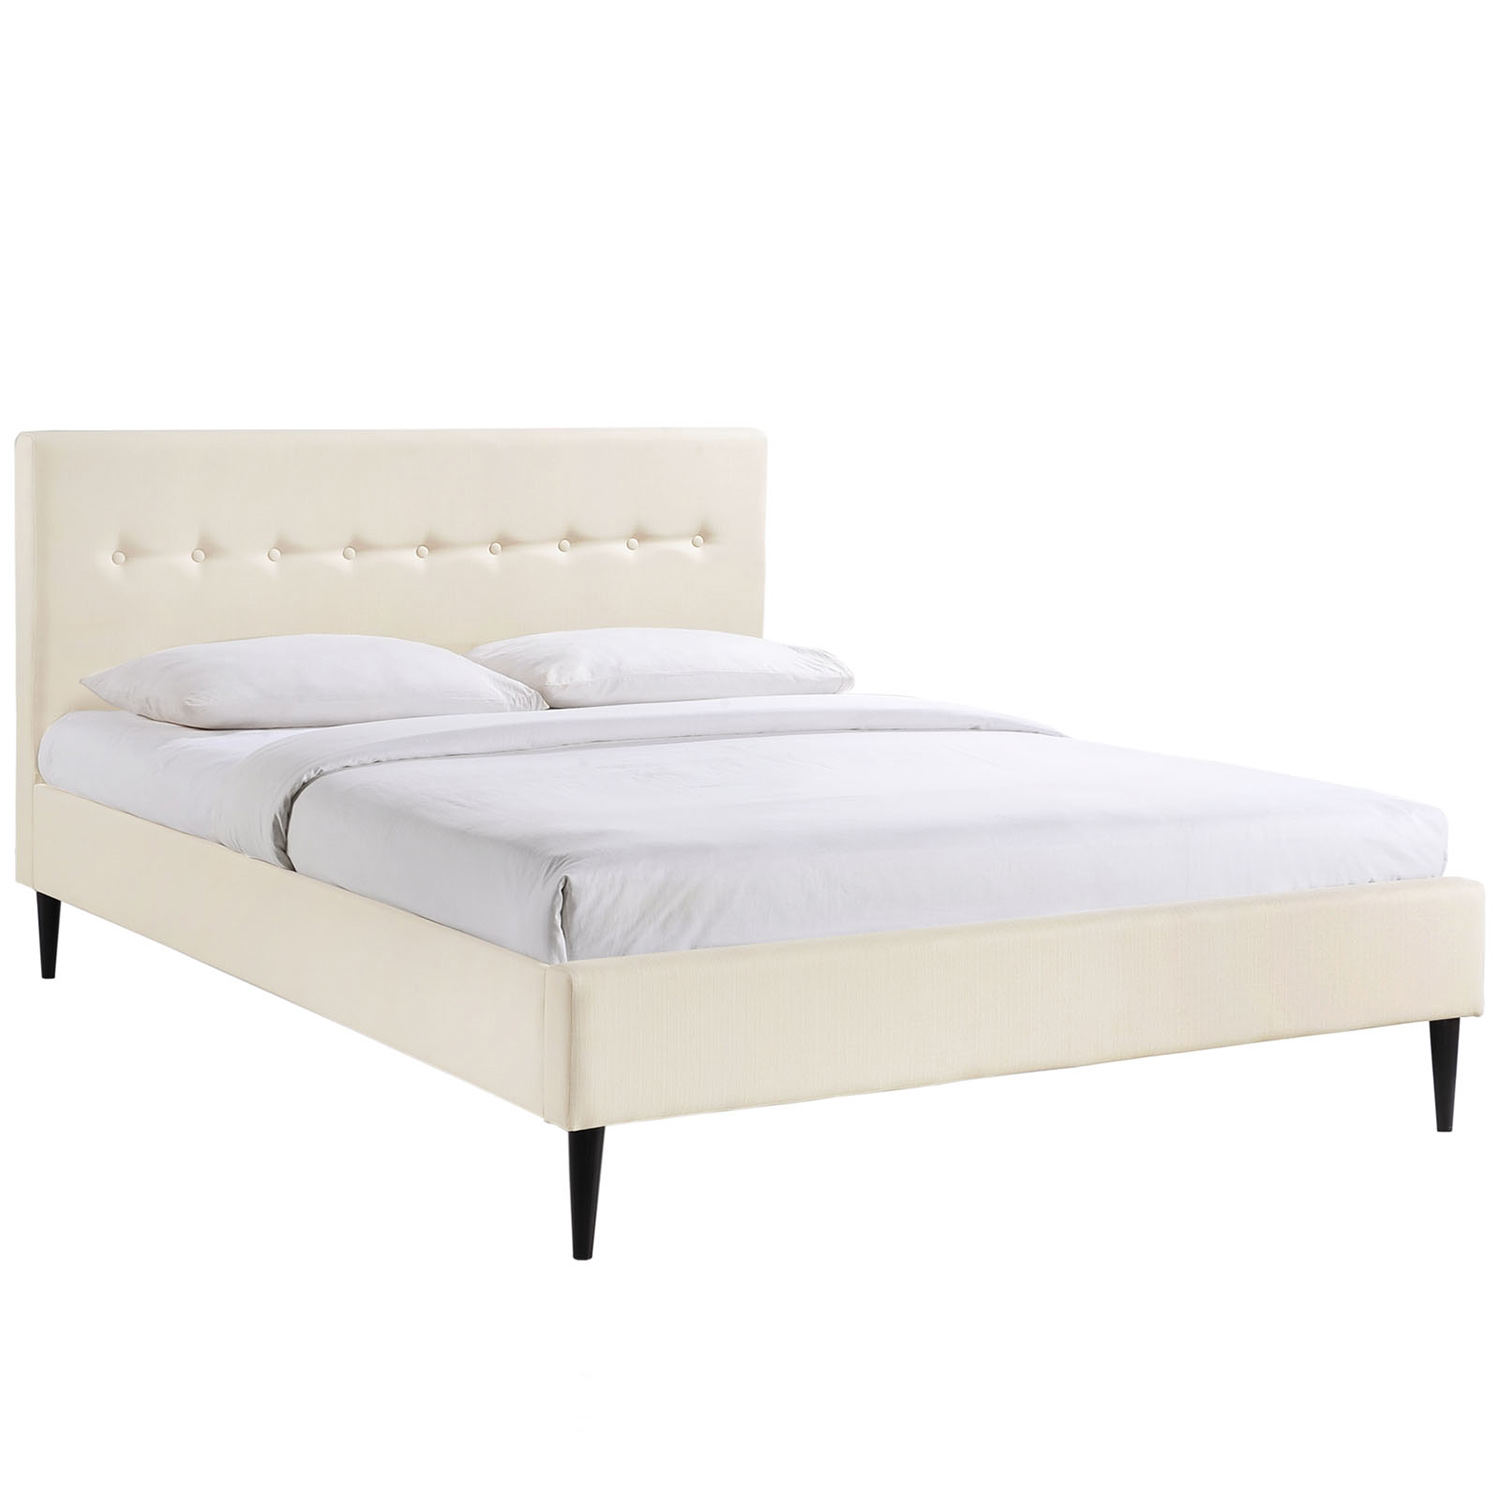 Modway Stacy Bed - Ivory